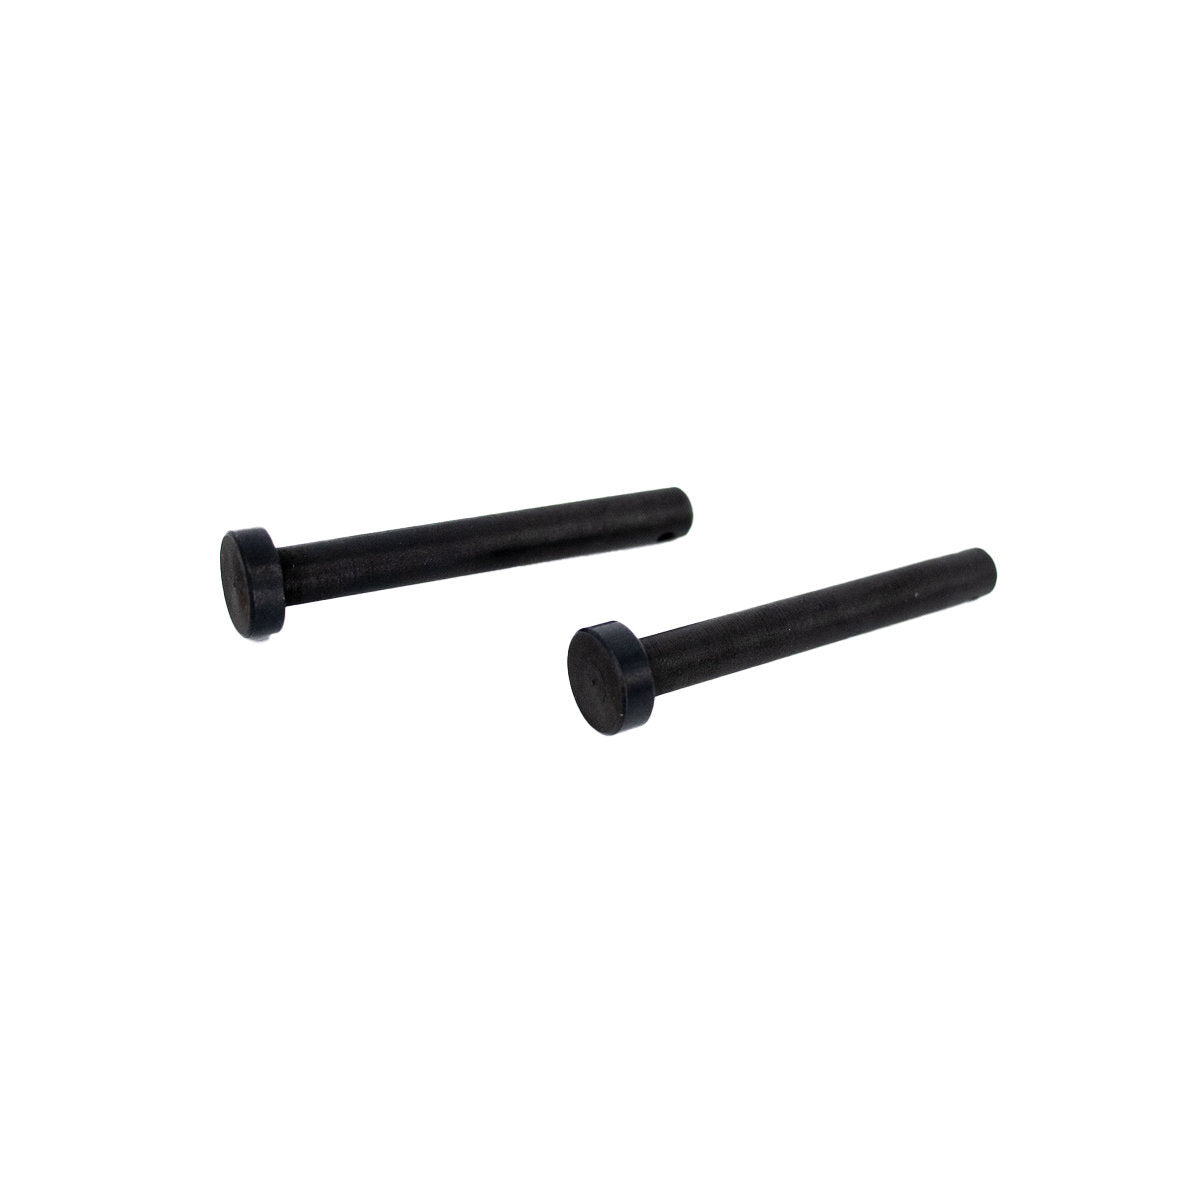 Valken M17 HC/Receiver Pins Paintball Replacement Parts - Eminent Paintball And Airsoft